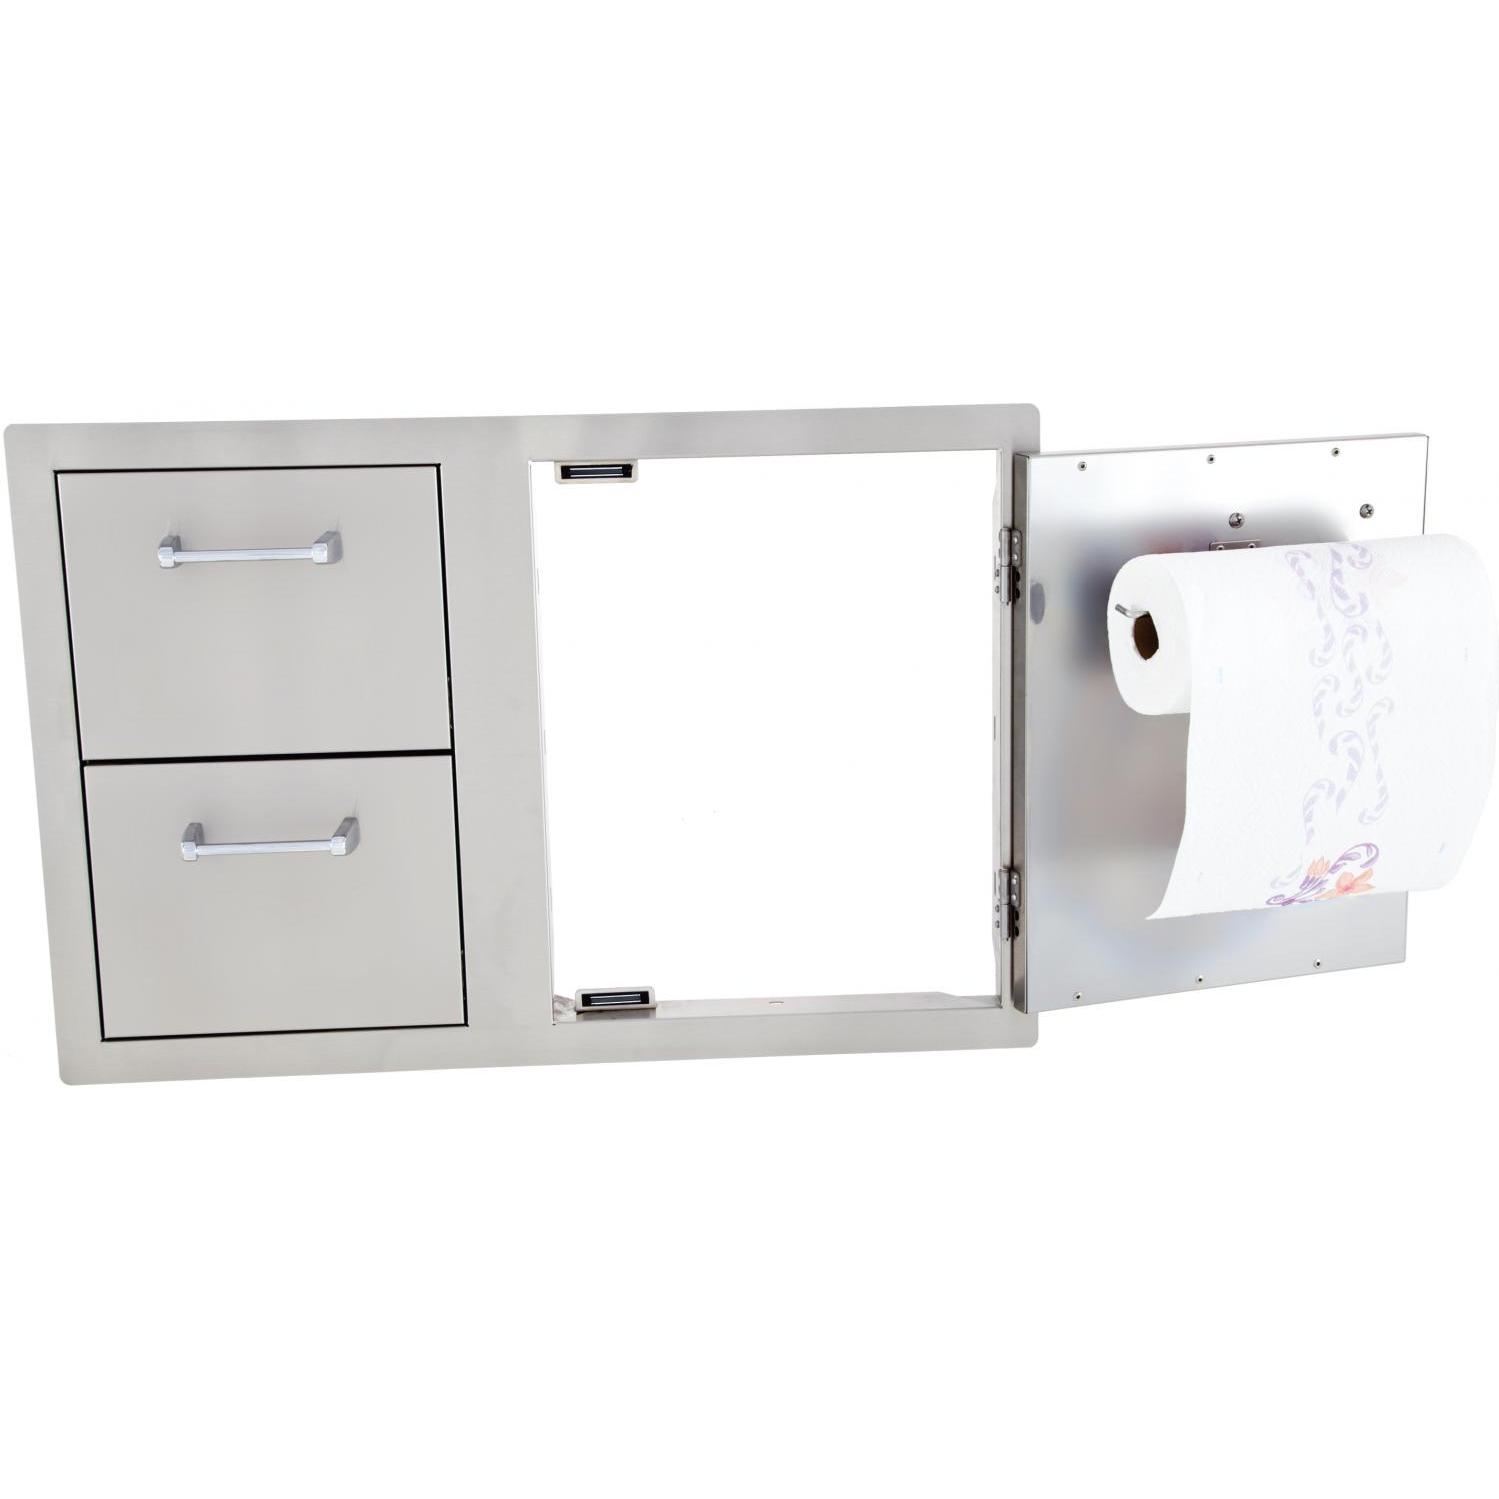 https://extremebackyarddesigns.com/wp-content/uploads/2016/11/Lion_33-inch-access-door-and-double-drawer-combo-2.jpg